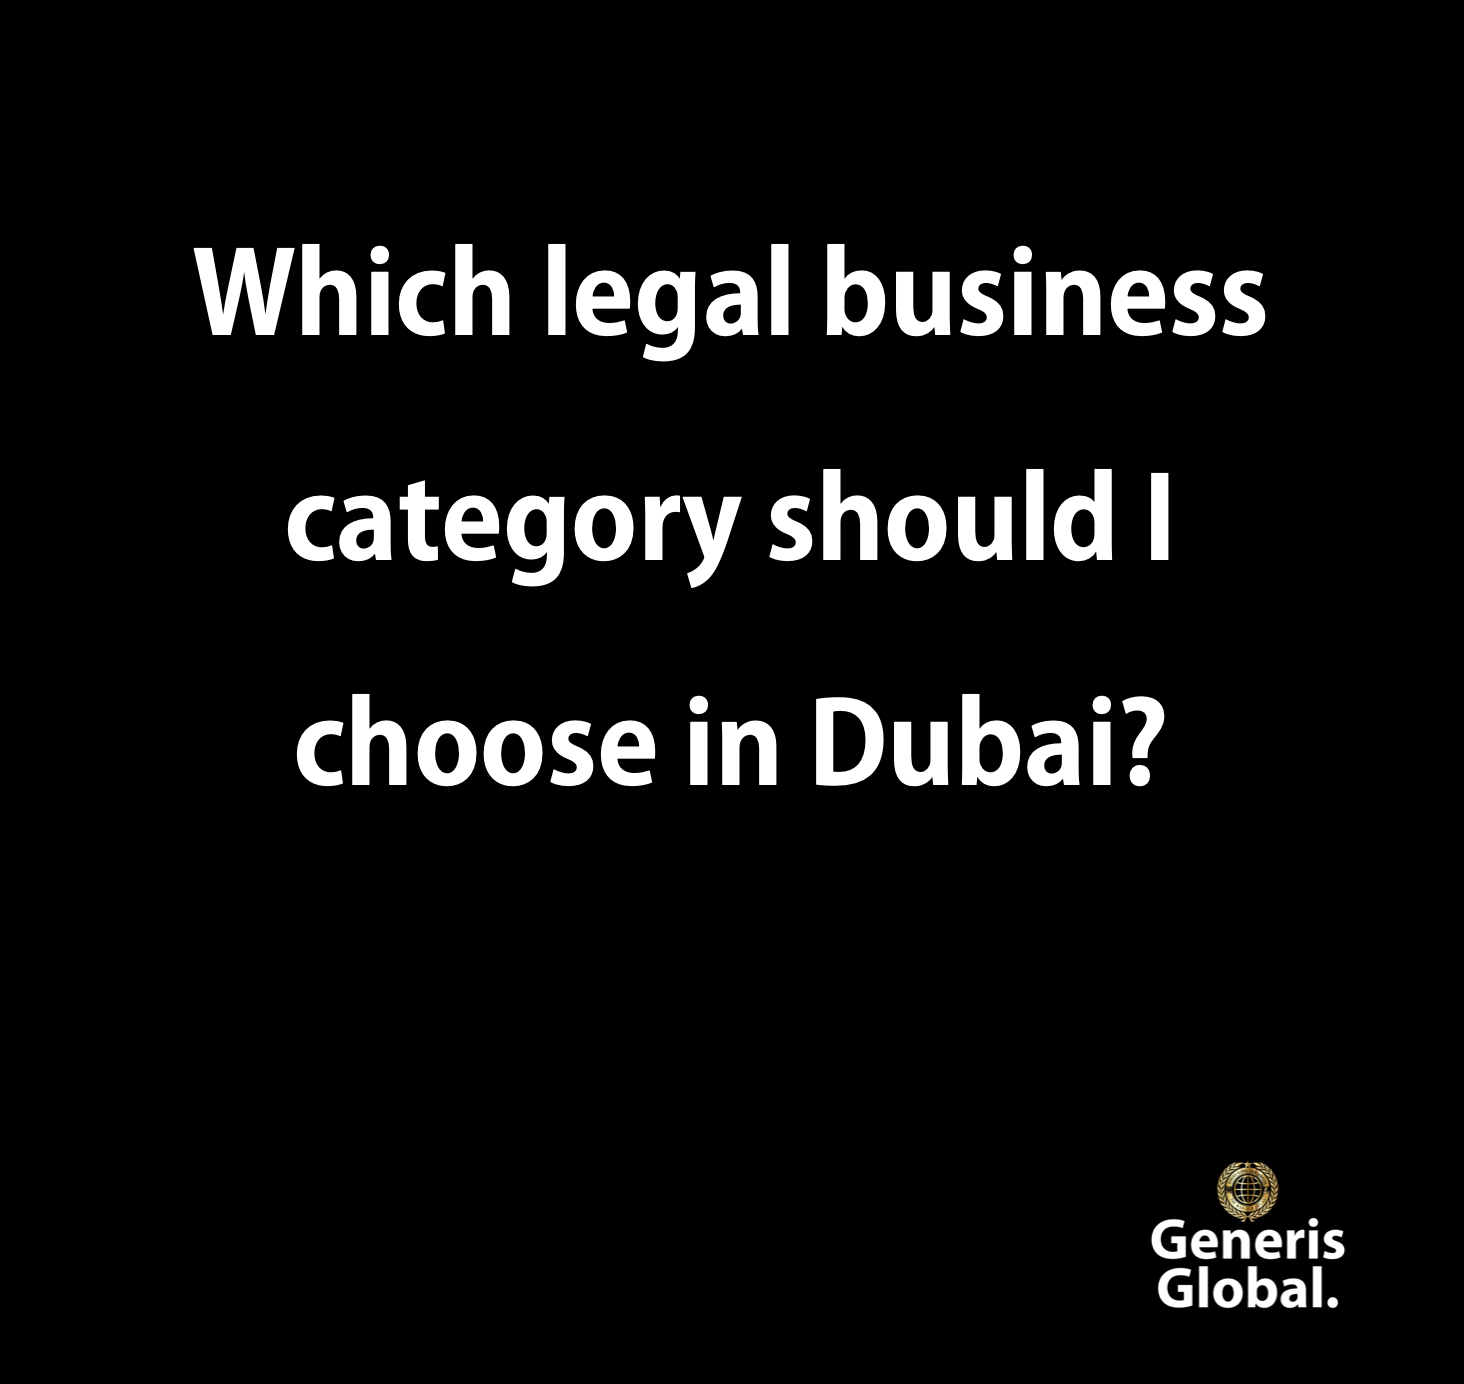 Which legal business category should I choose in Dubai?